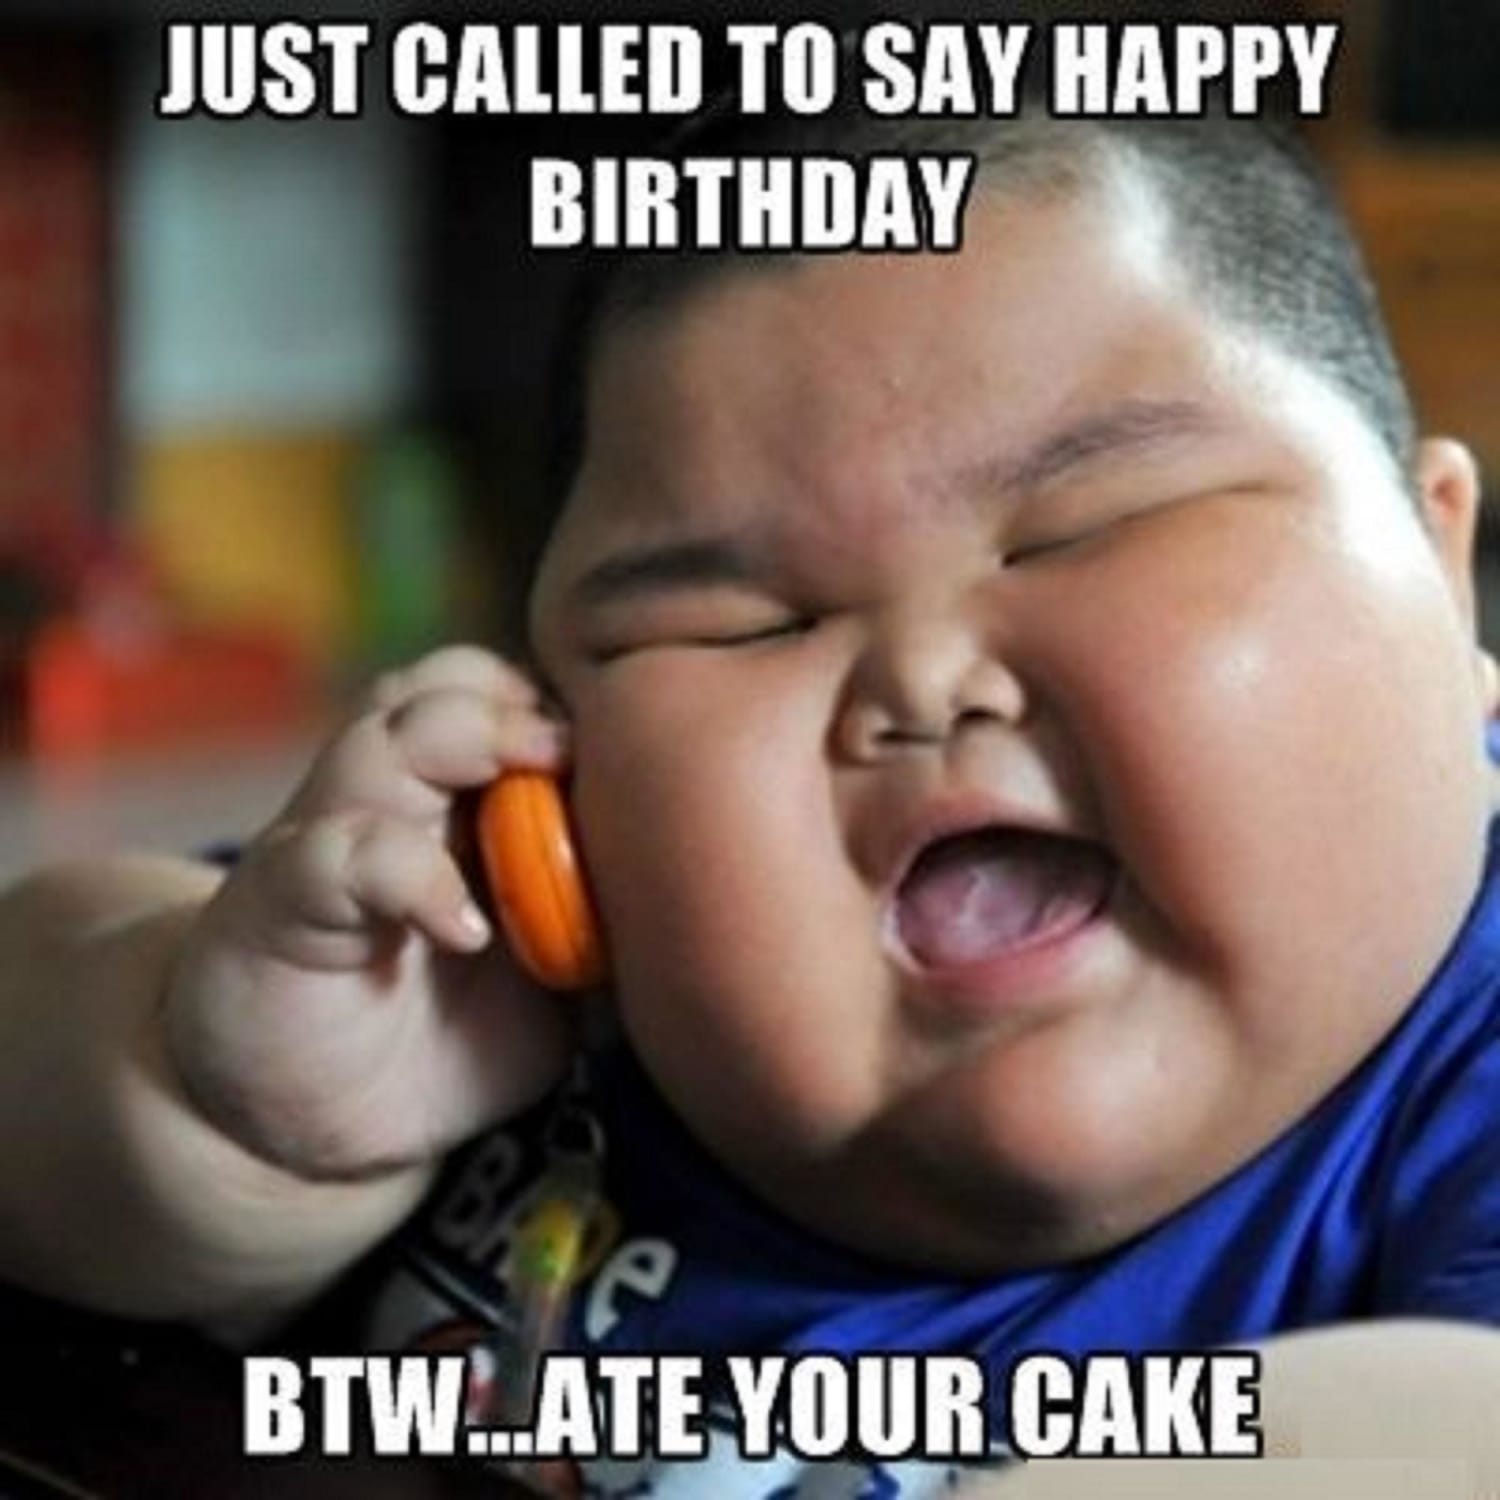 Funny Happy Birthday Pictures and images - Funny Birthday Images